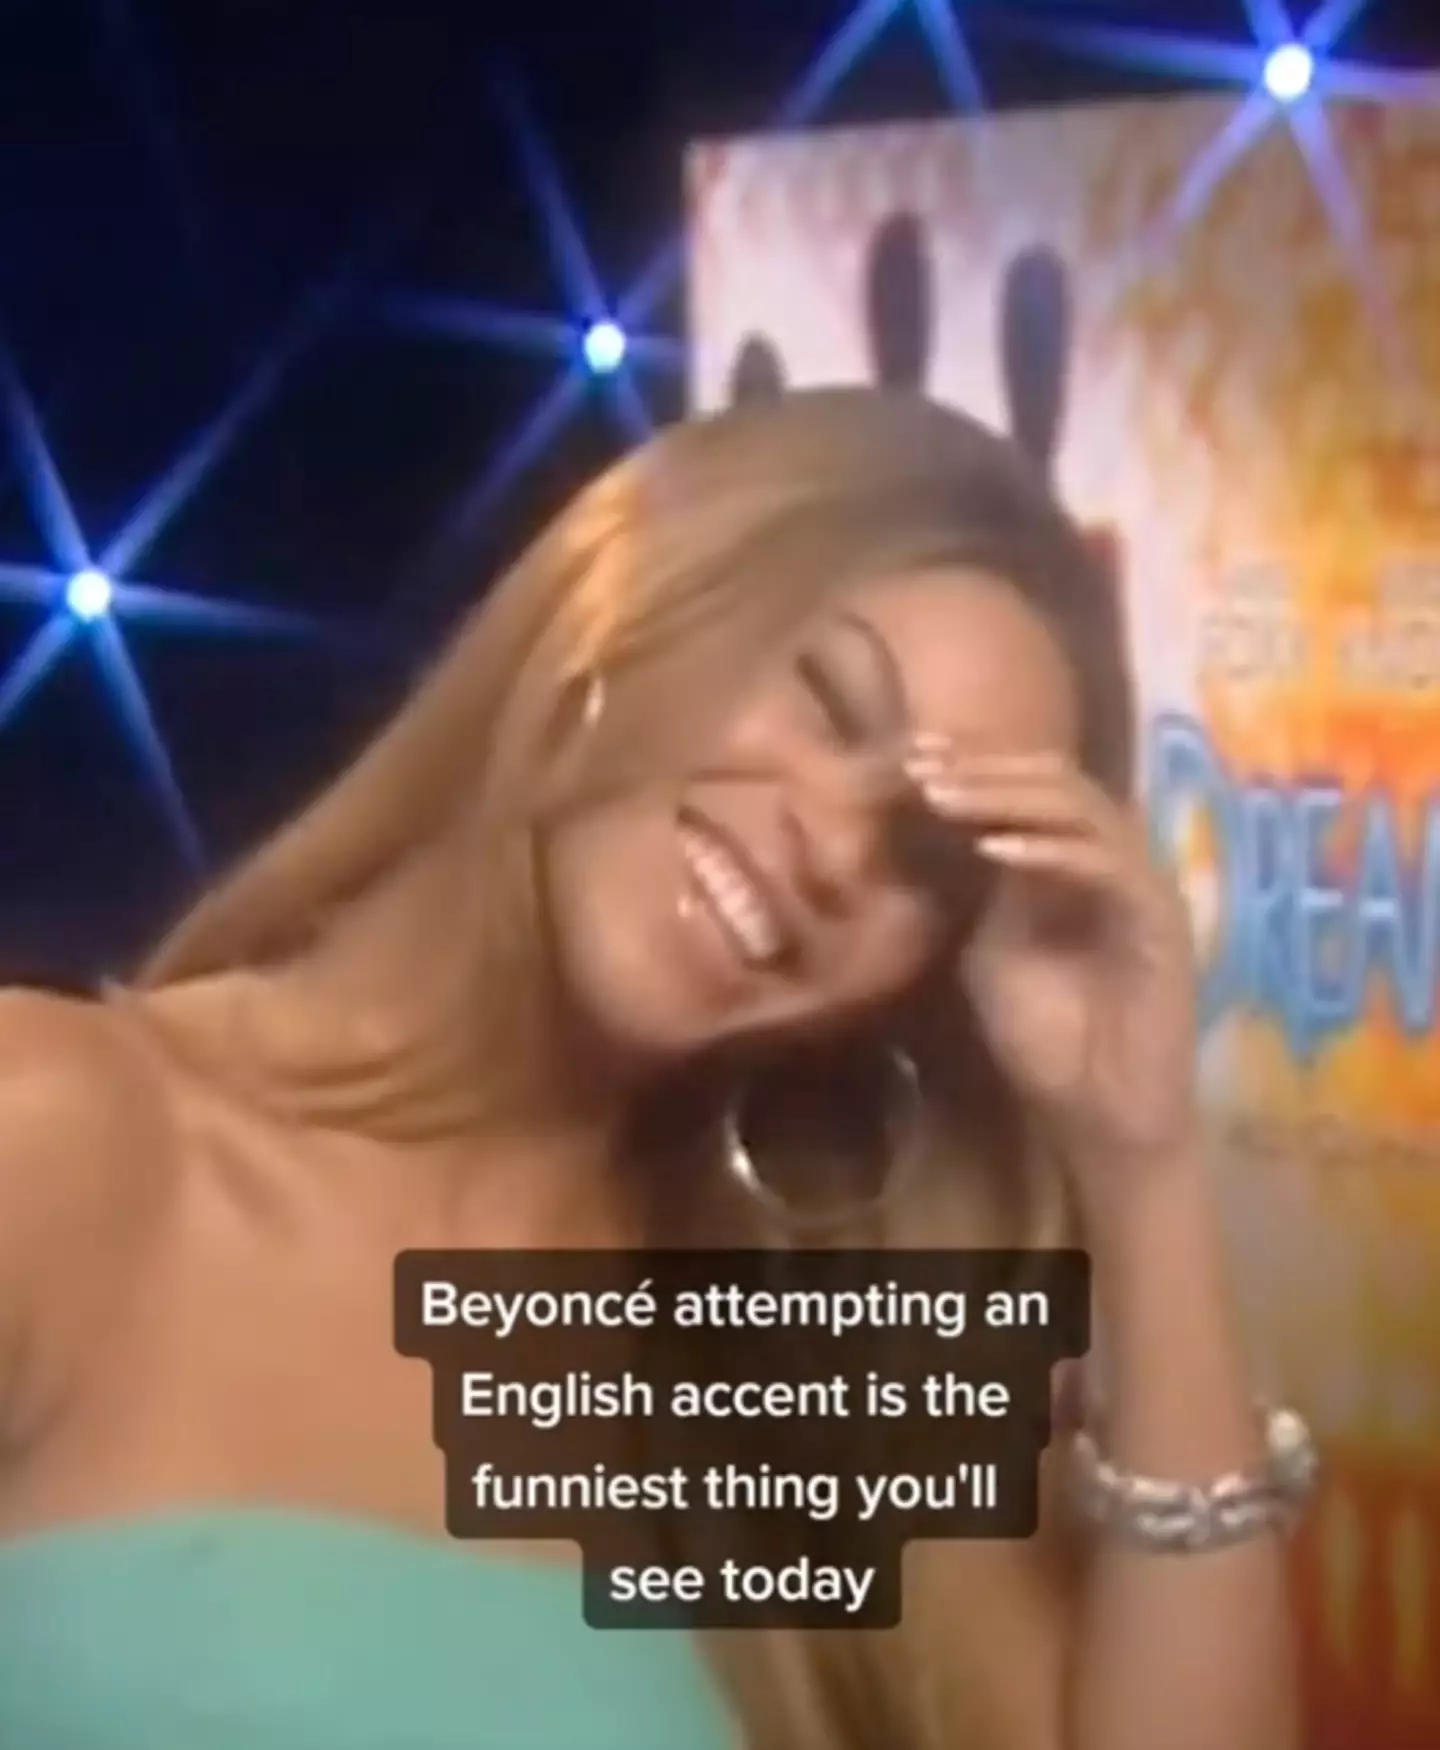 Even Bey couldn’t help but laugh at her attempt.